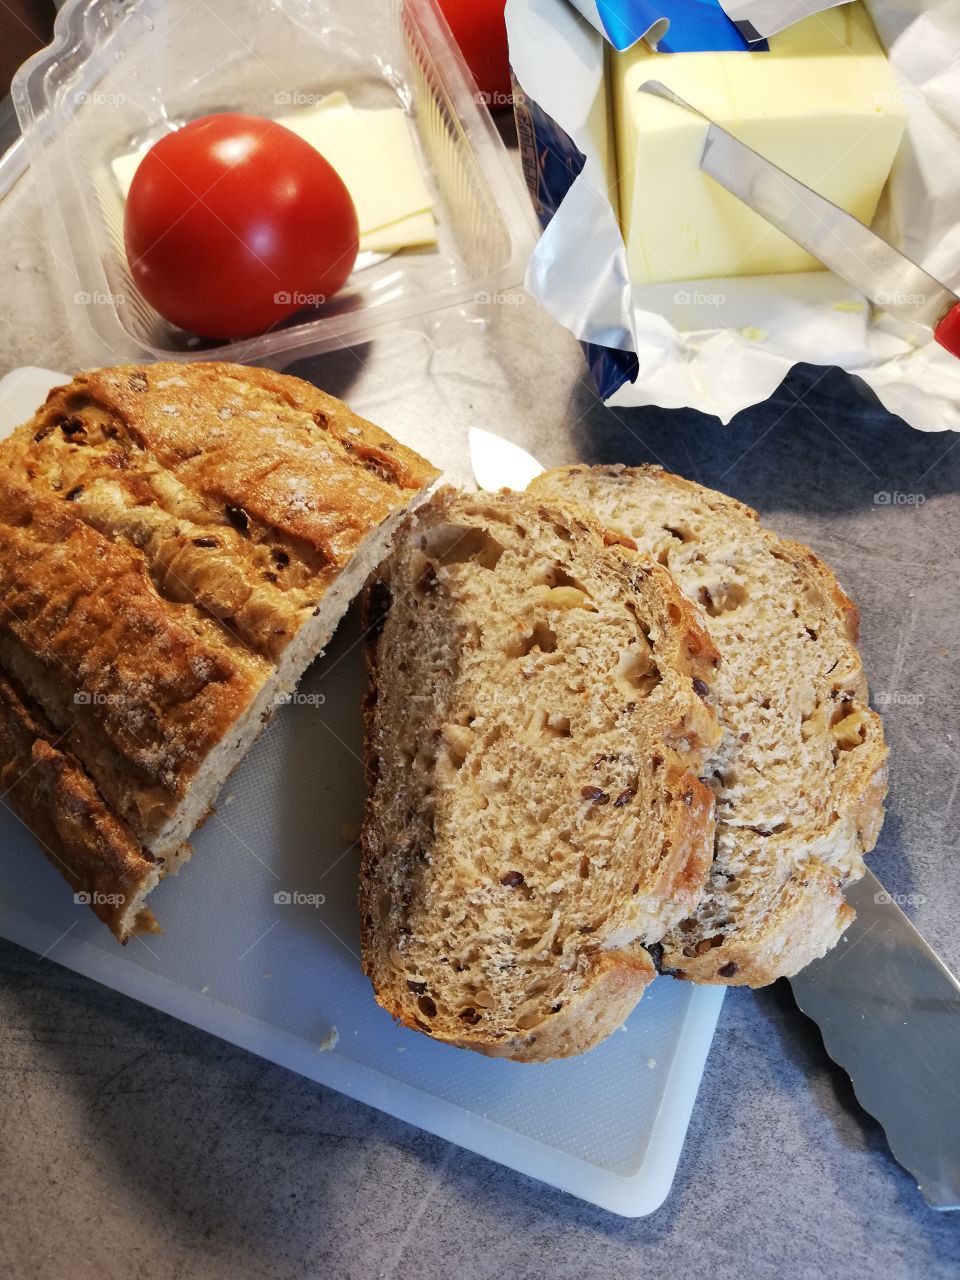 A loaf of bread with fruit and seeds on a chopping board, some crumbs on it. An edge of a knife is wavy. In an open butter package is another knife with red handle. A tomato and cheese slices in a plastic box.